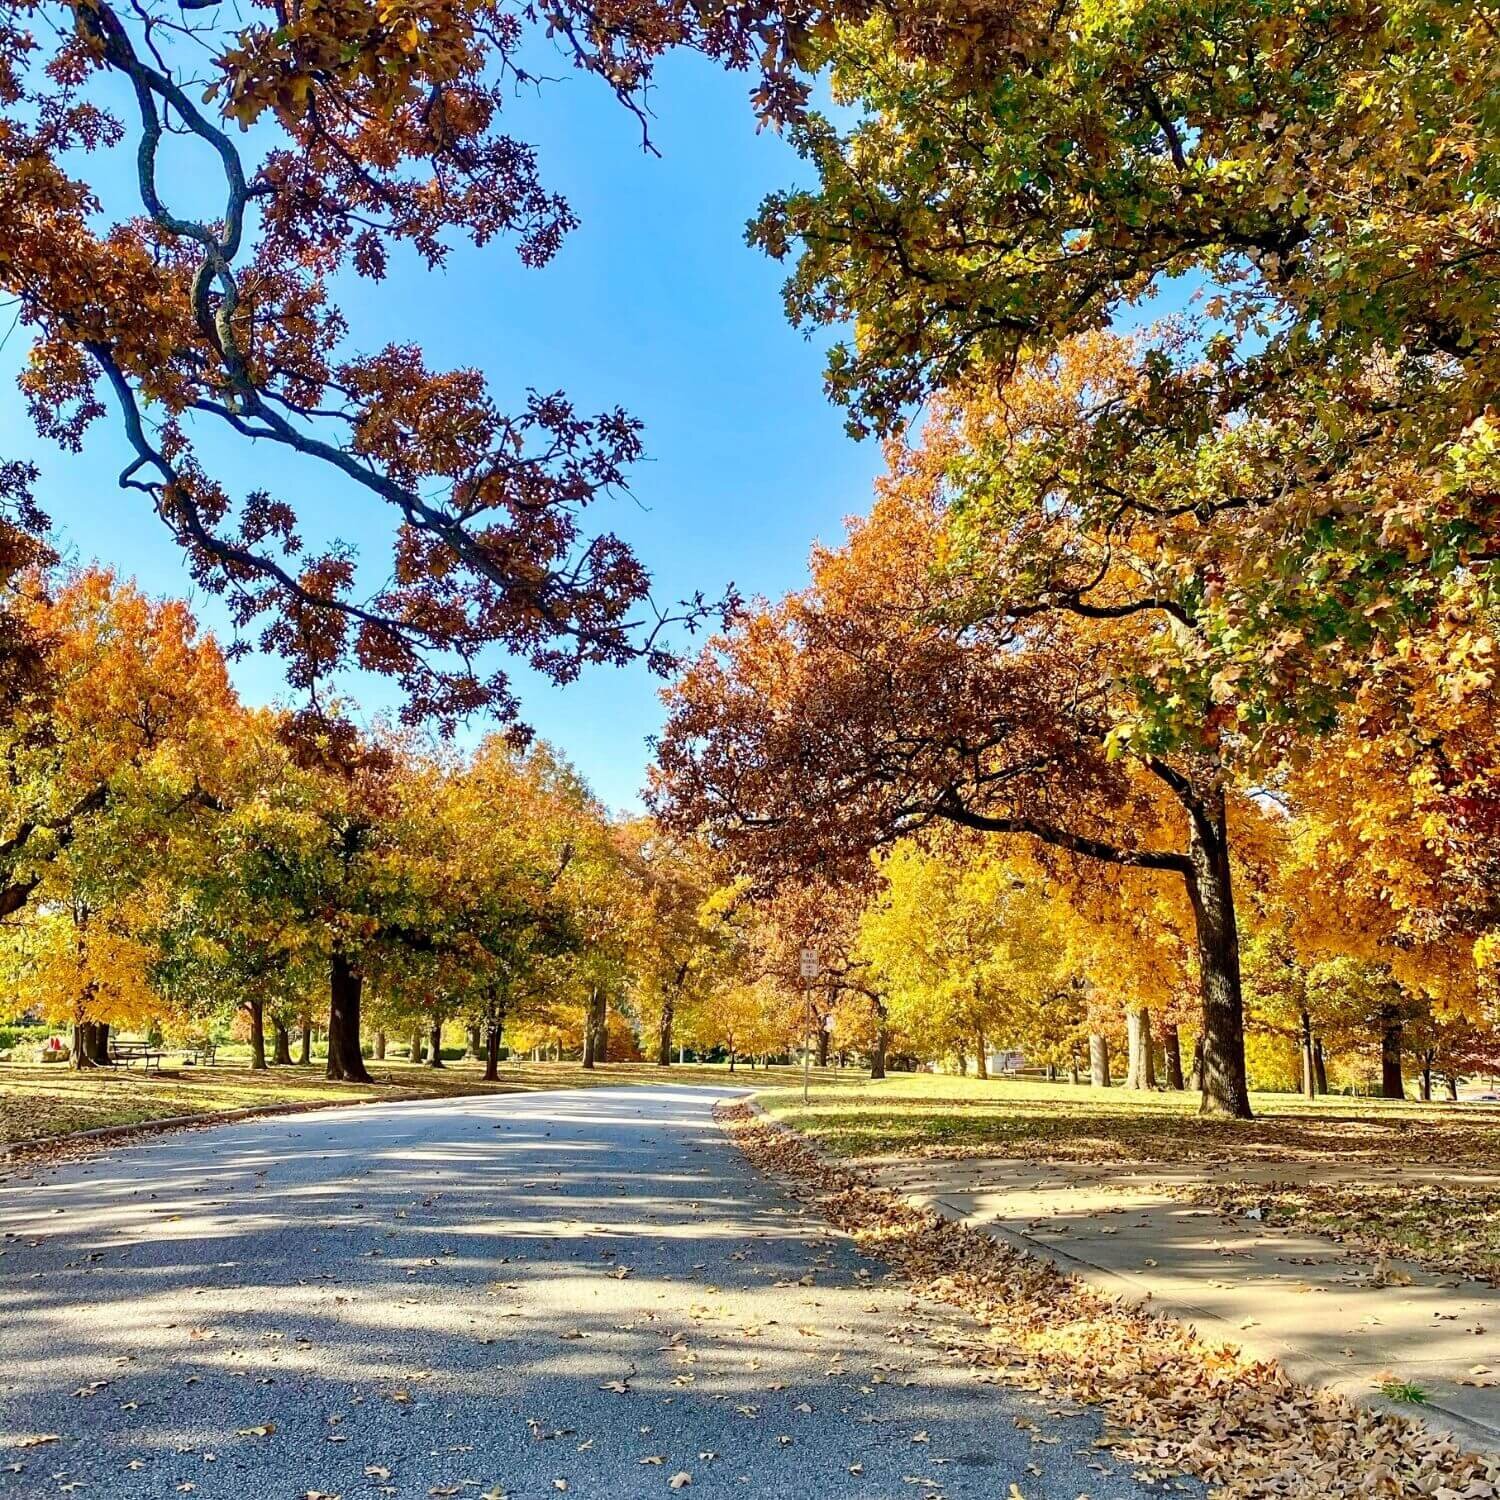 Tulsa Things to Do in the Fall - Woodward Park TulsaGo.jpg